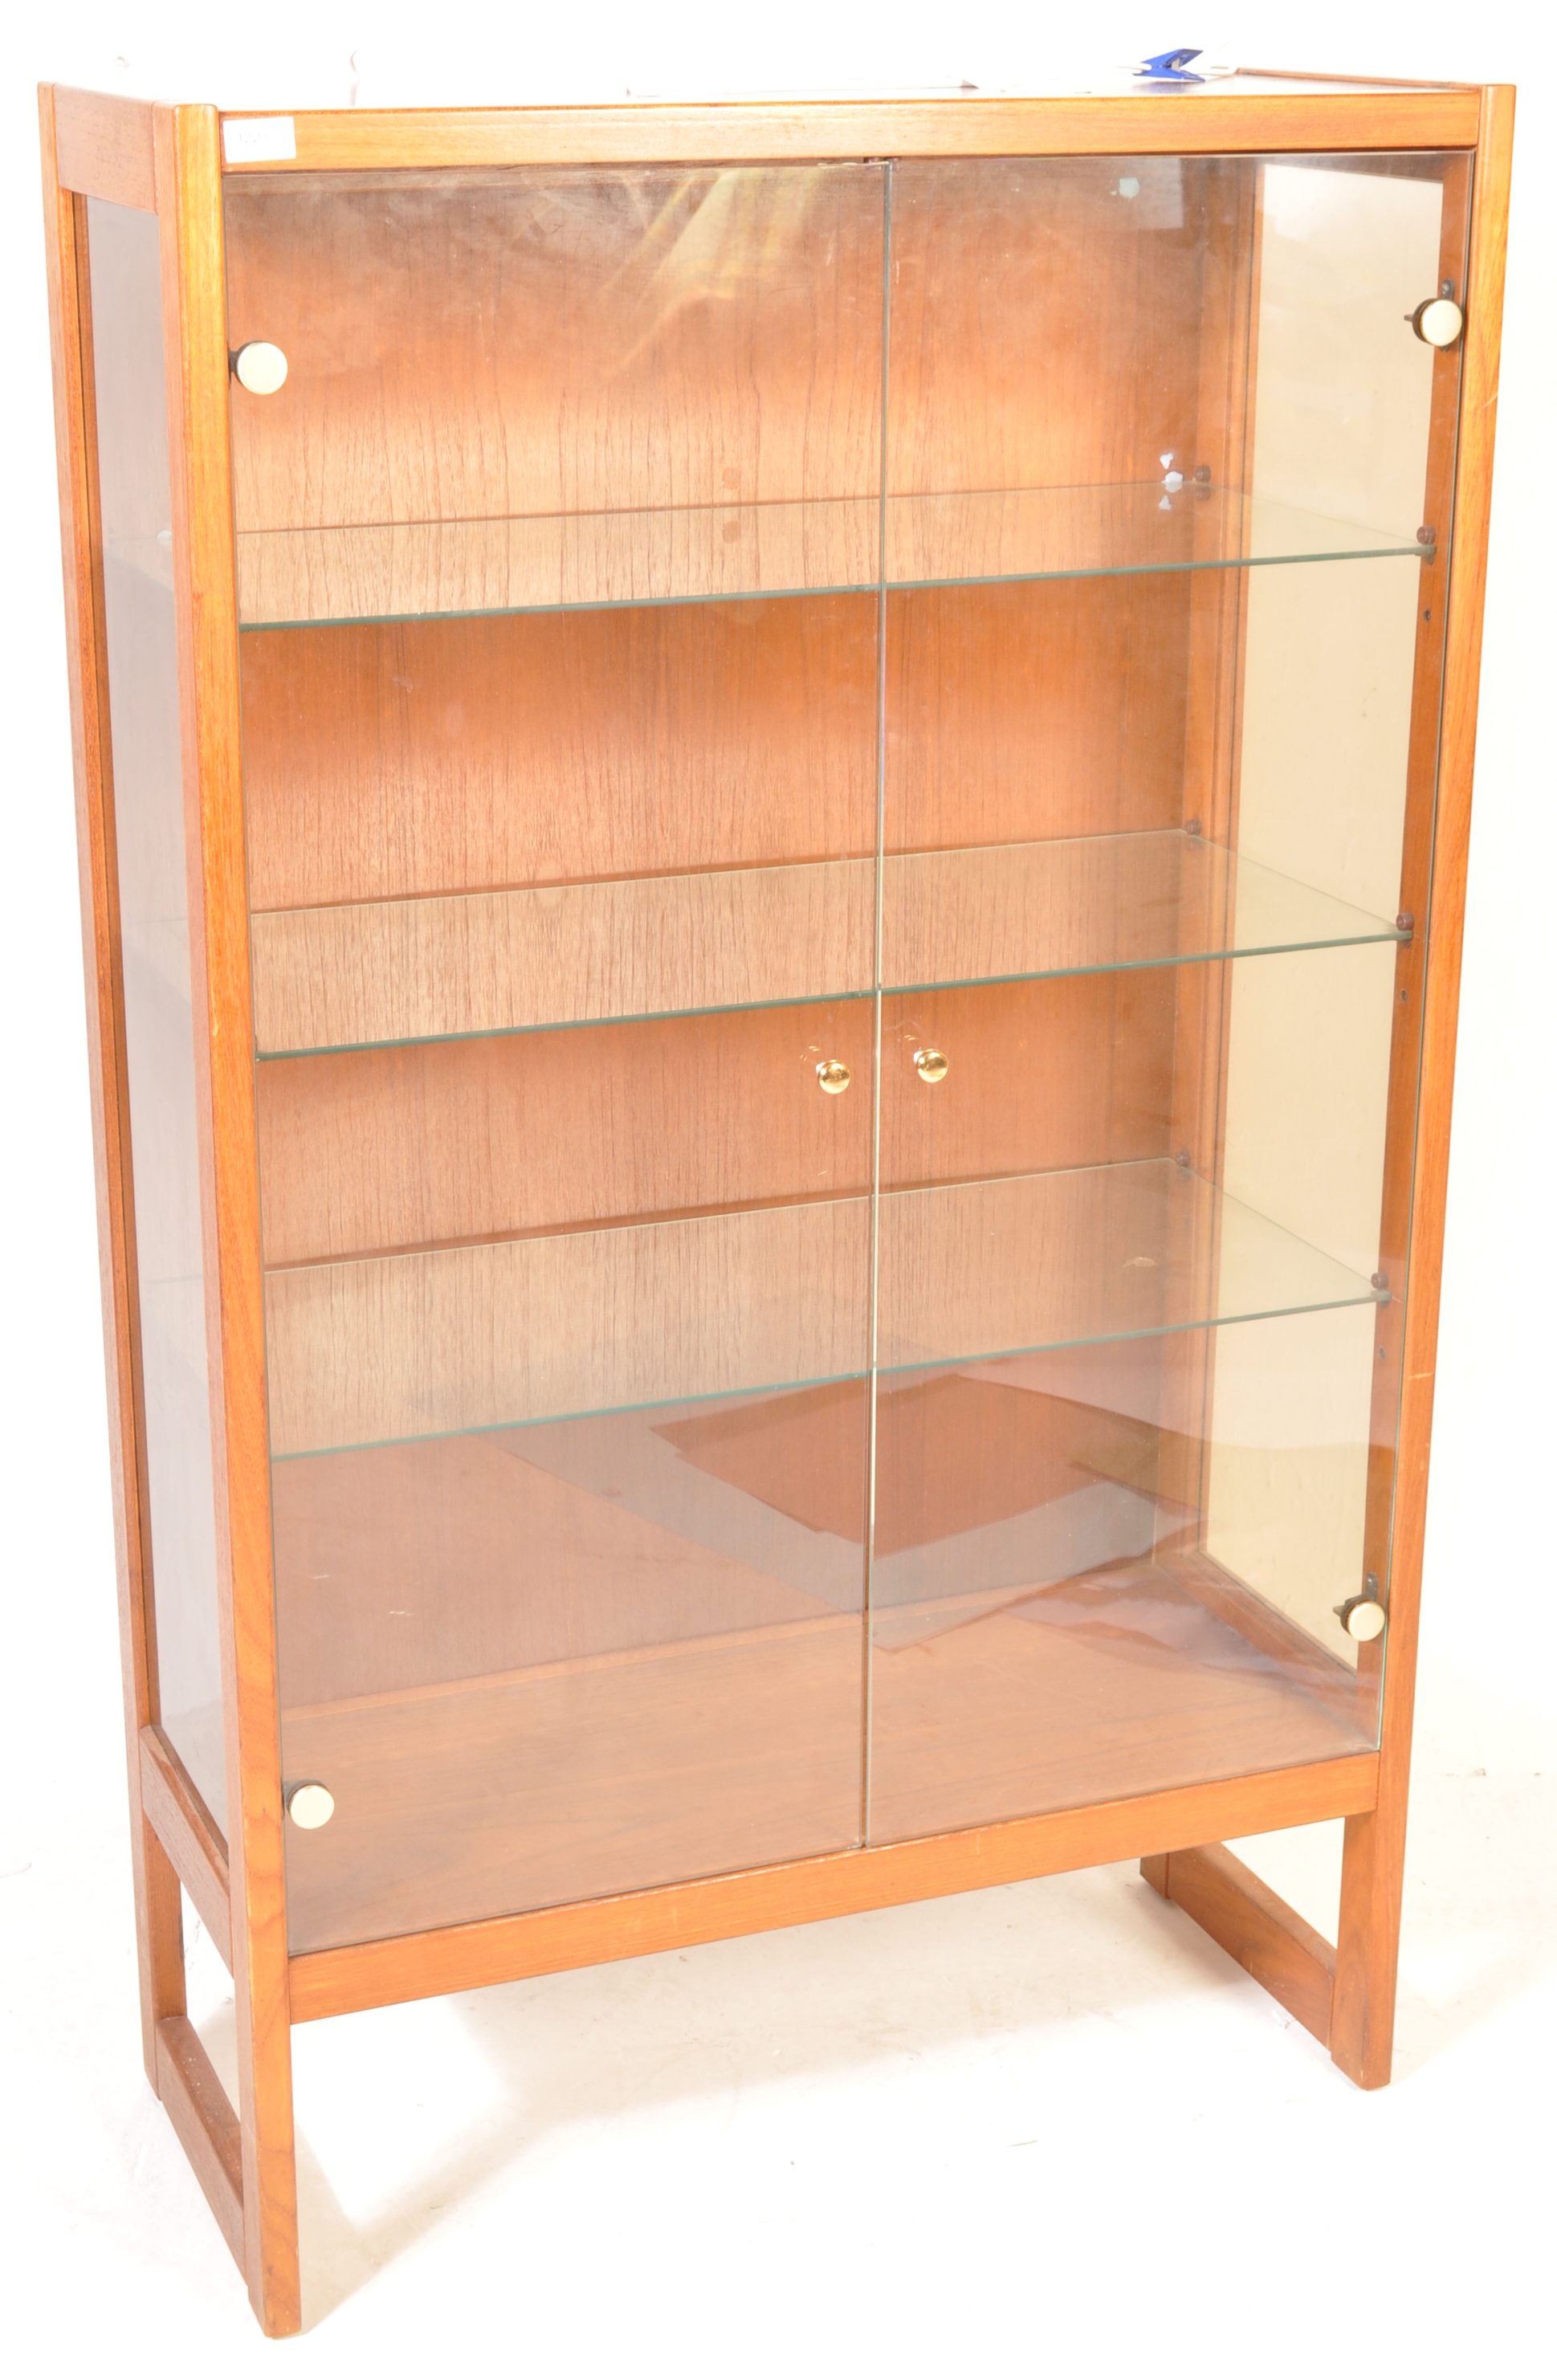 MID 20TH CENTURY DANISH INSPIRED TEAK WOOD AND GLASS DISPLAY CABINET - Image 2 of 6